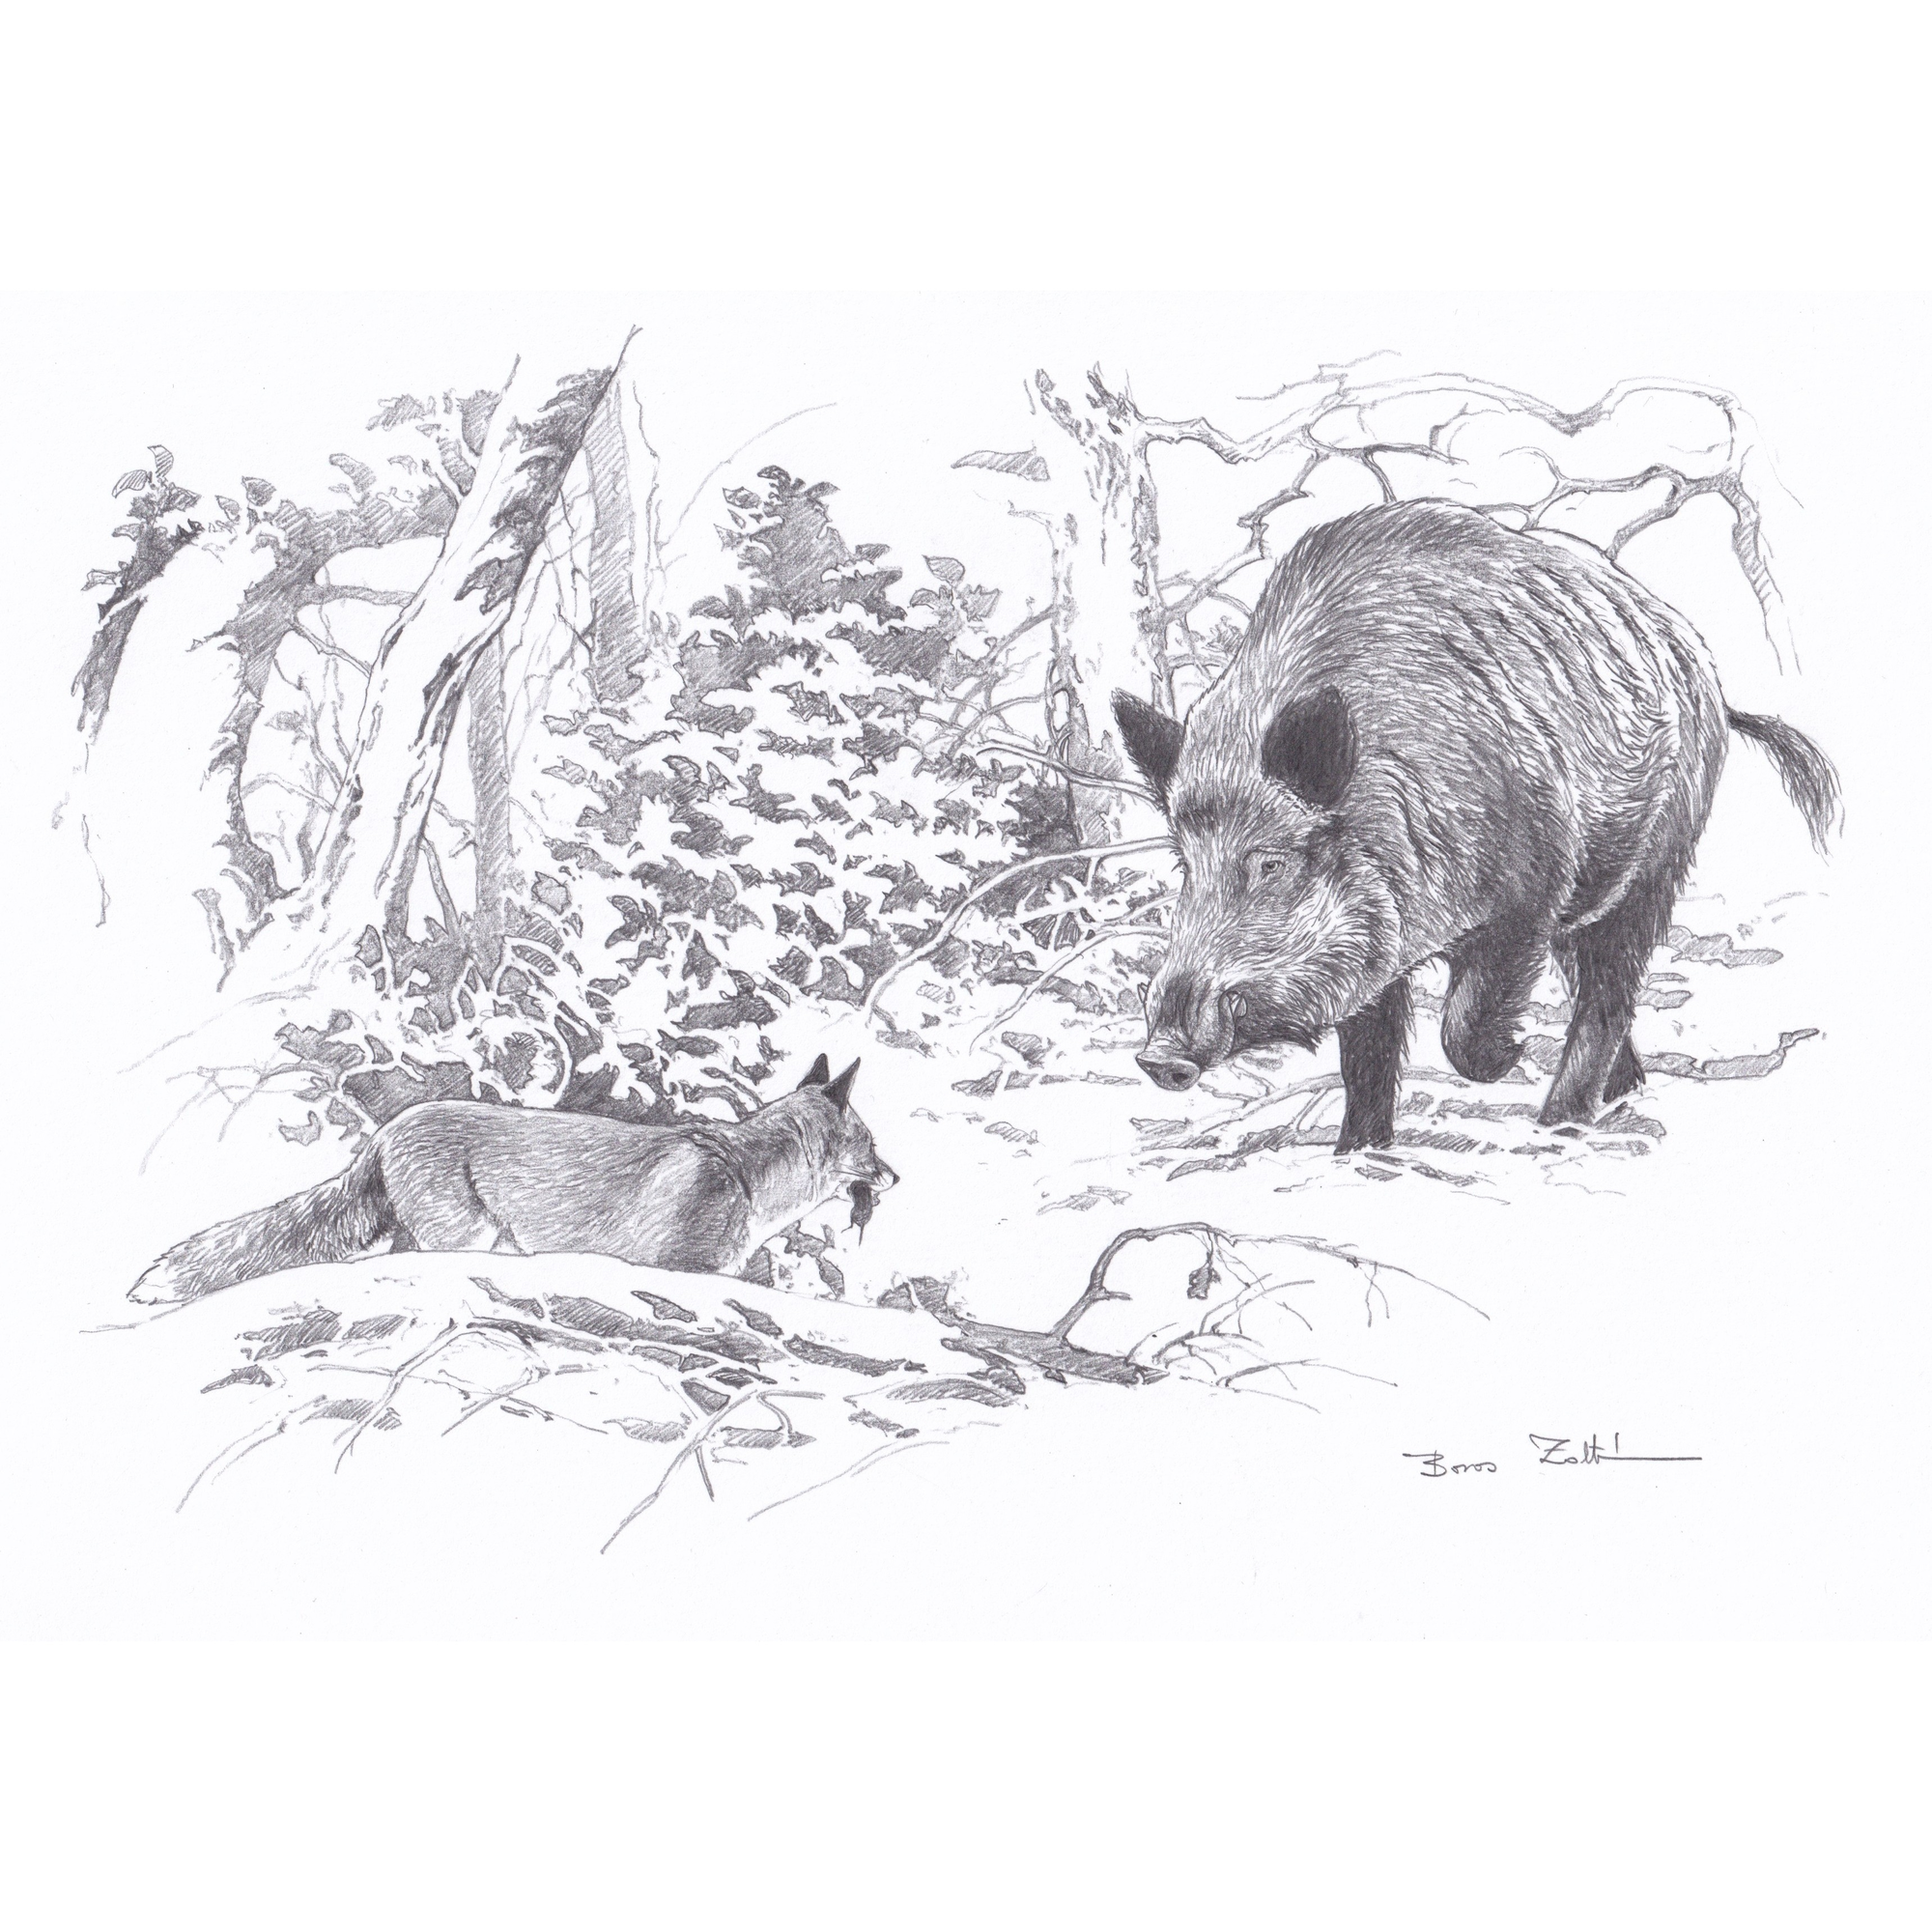 “Fox, Mouse and Male Boar”